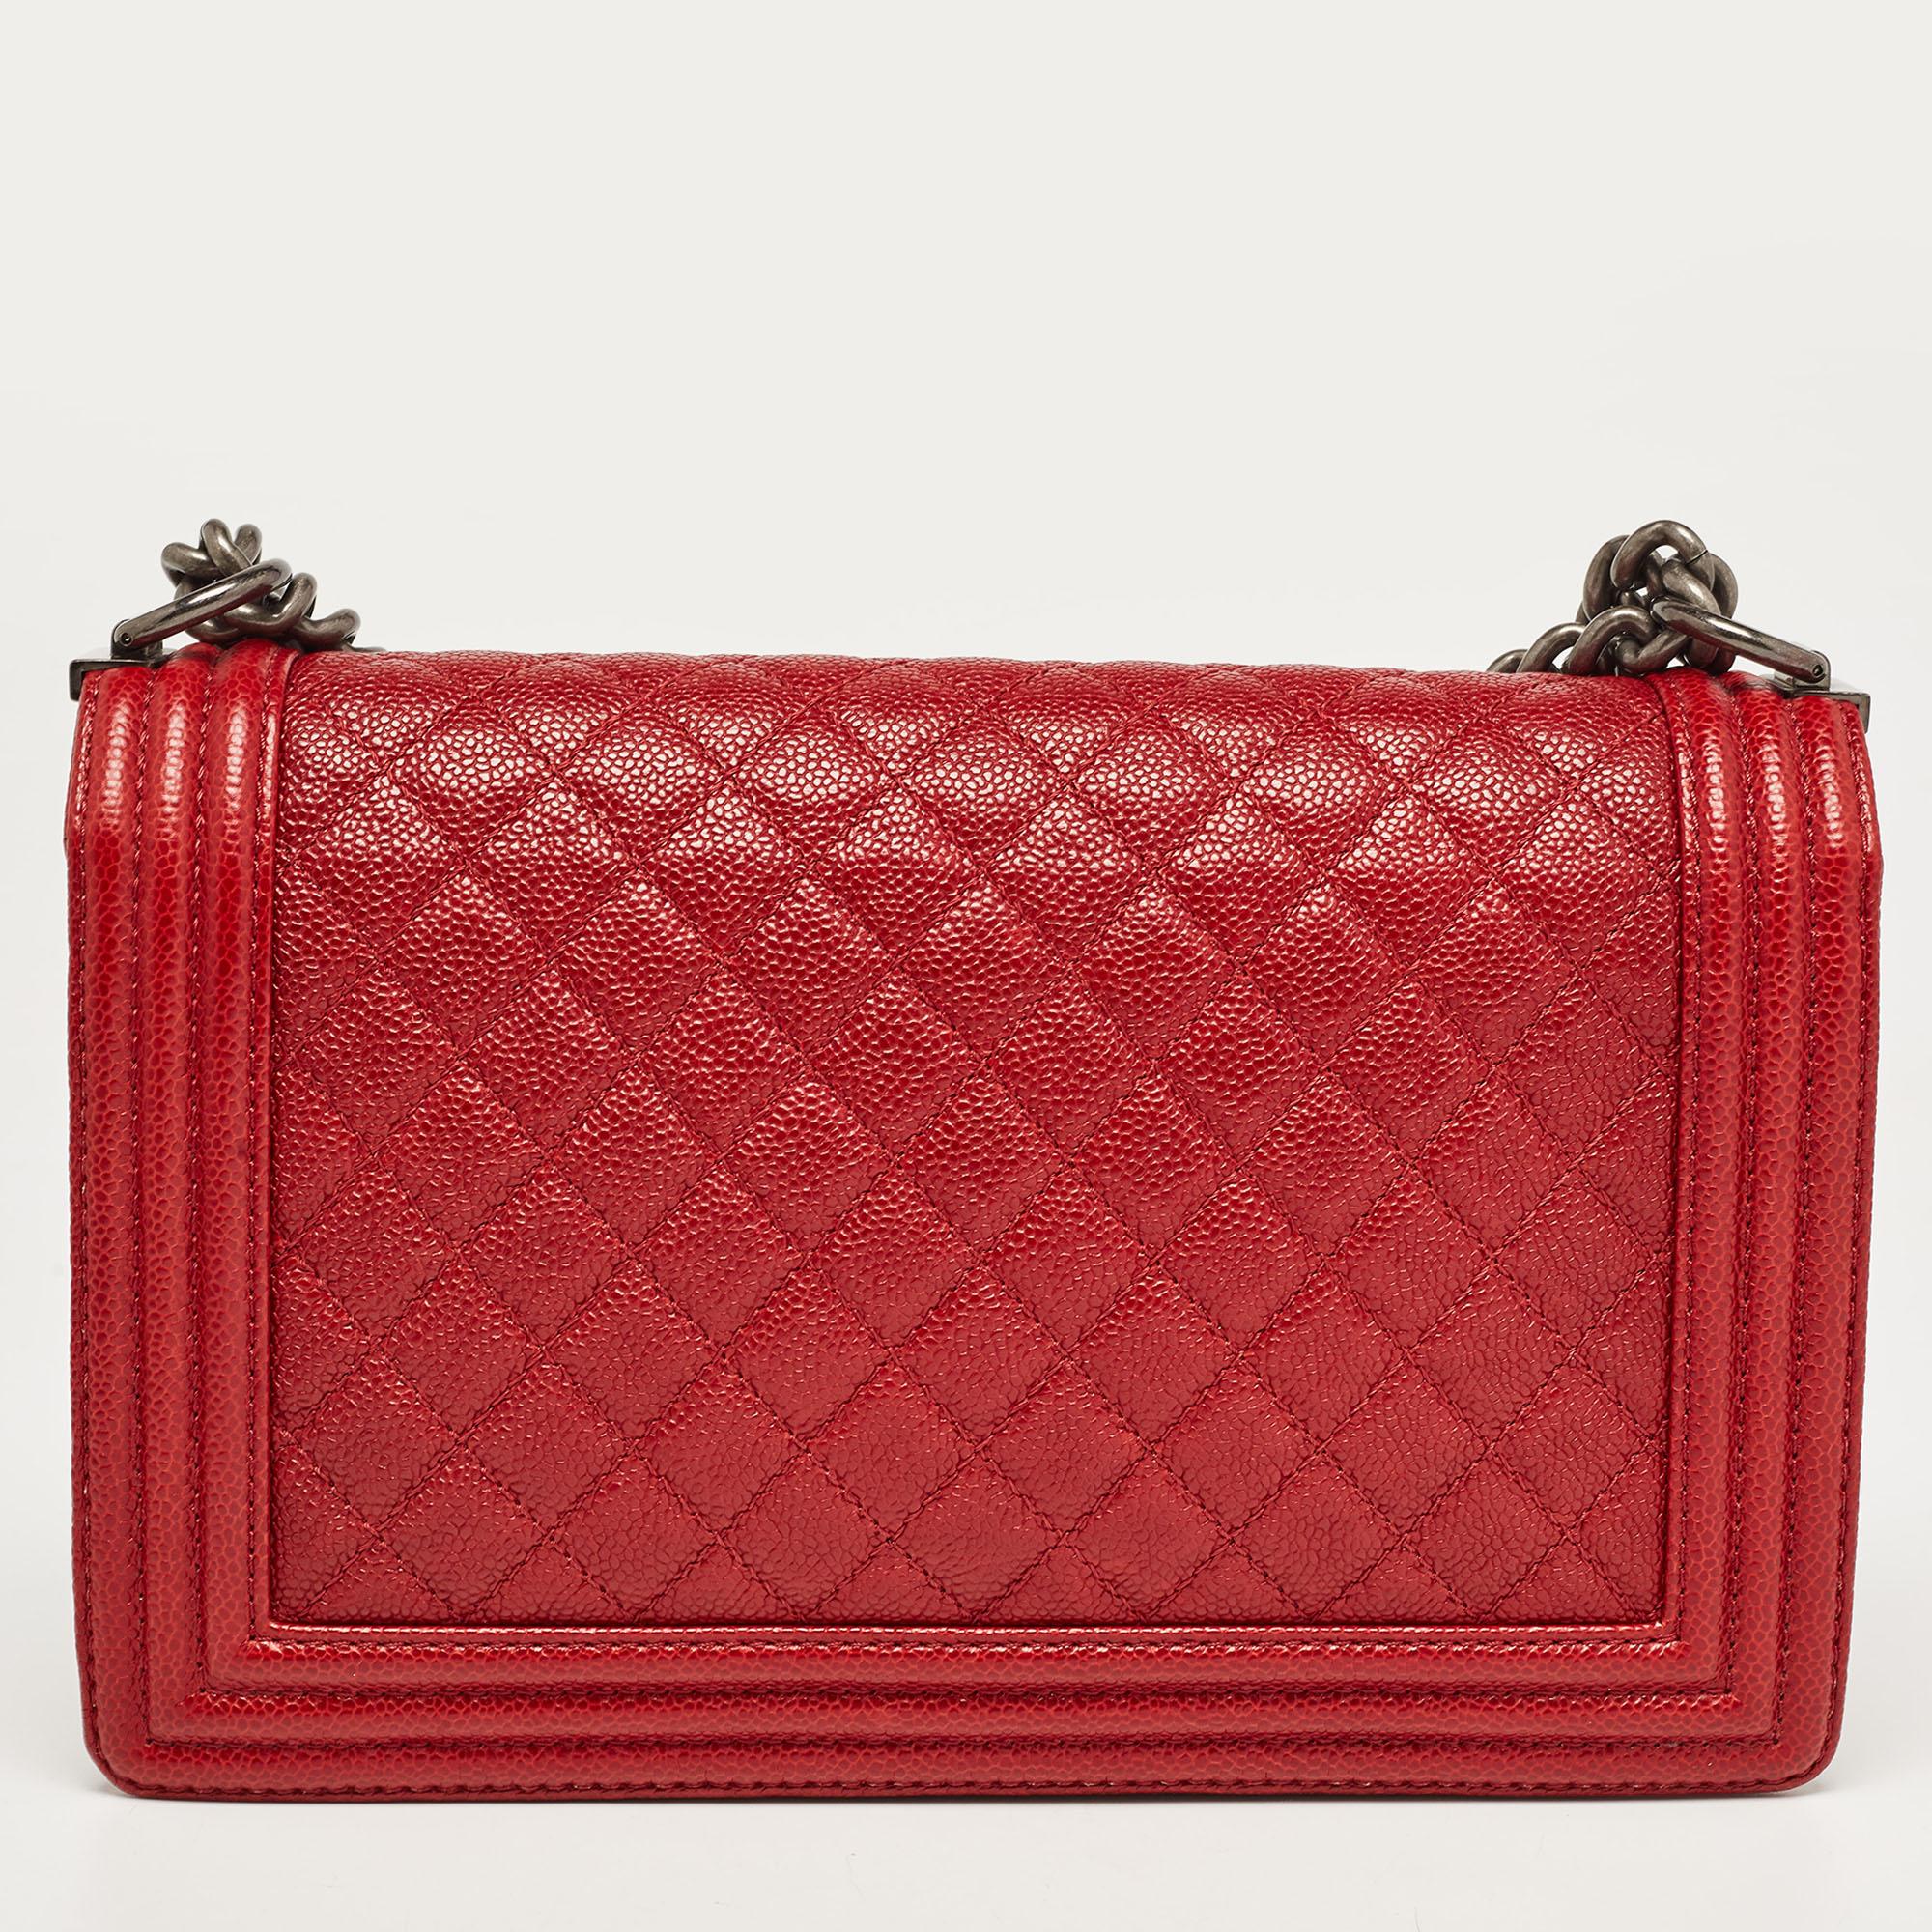 Chanel Red Quilted Caviar Leather New Medium Boy Bag For Sale 15